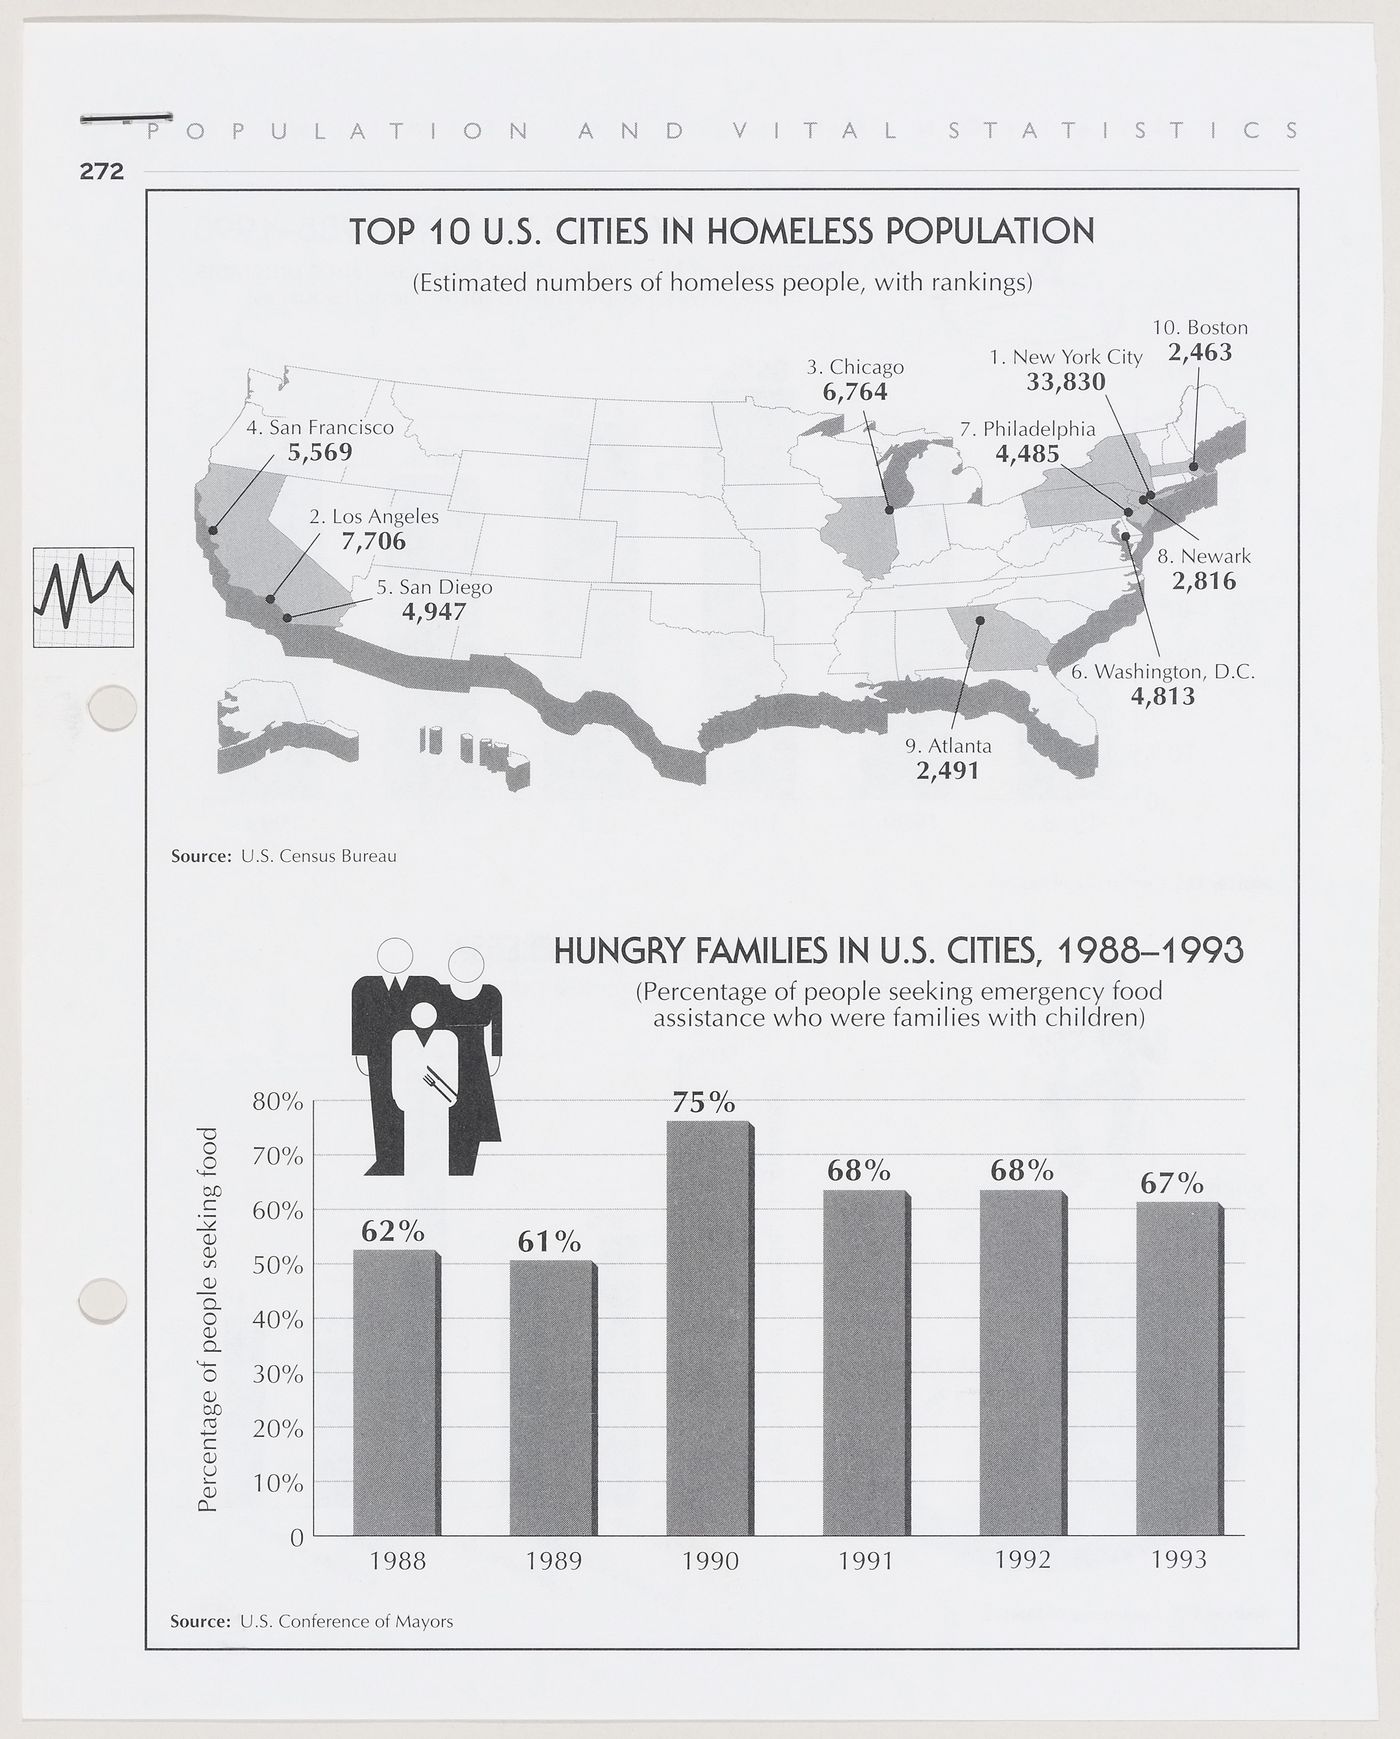 Statistics related to the top ten American cities in homeless population and statistics related to hungry families in U.S. cities (document from the IFPRI project records)